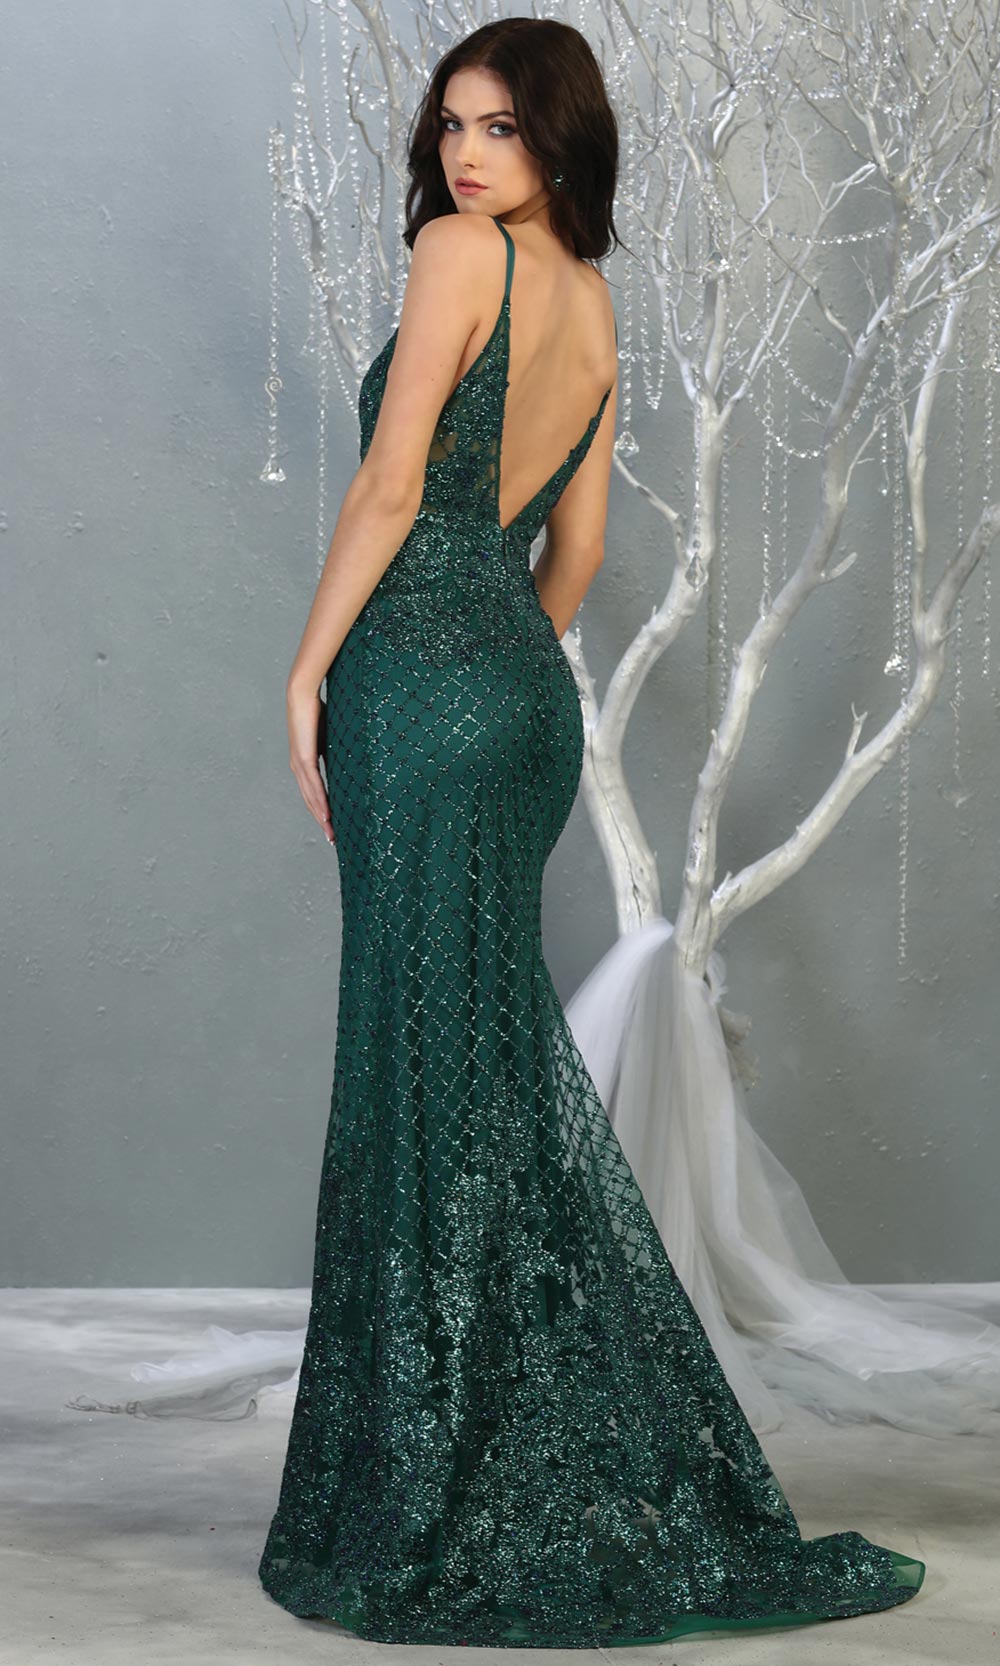 Mayqueen RQ7845 long hunter green sequin v neck evening gown w/straps & low back. Full length fitted green gown is perfect for  enagagement/e-shoot dress, formal wedding guest, evening party dress,prom,engagement, wedding reception. Plus sizes avail-b.jpg